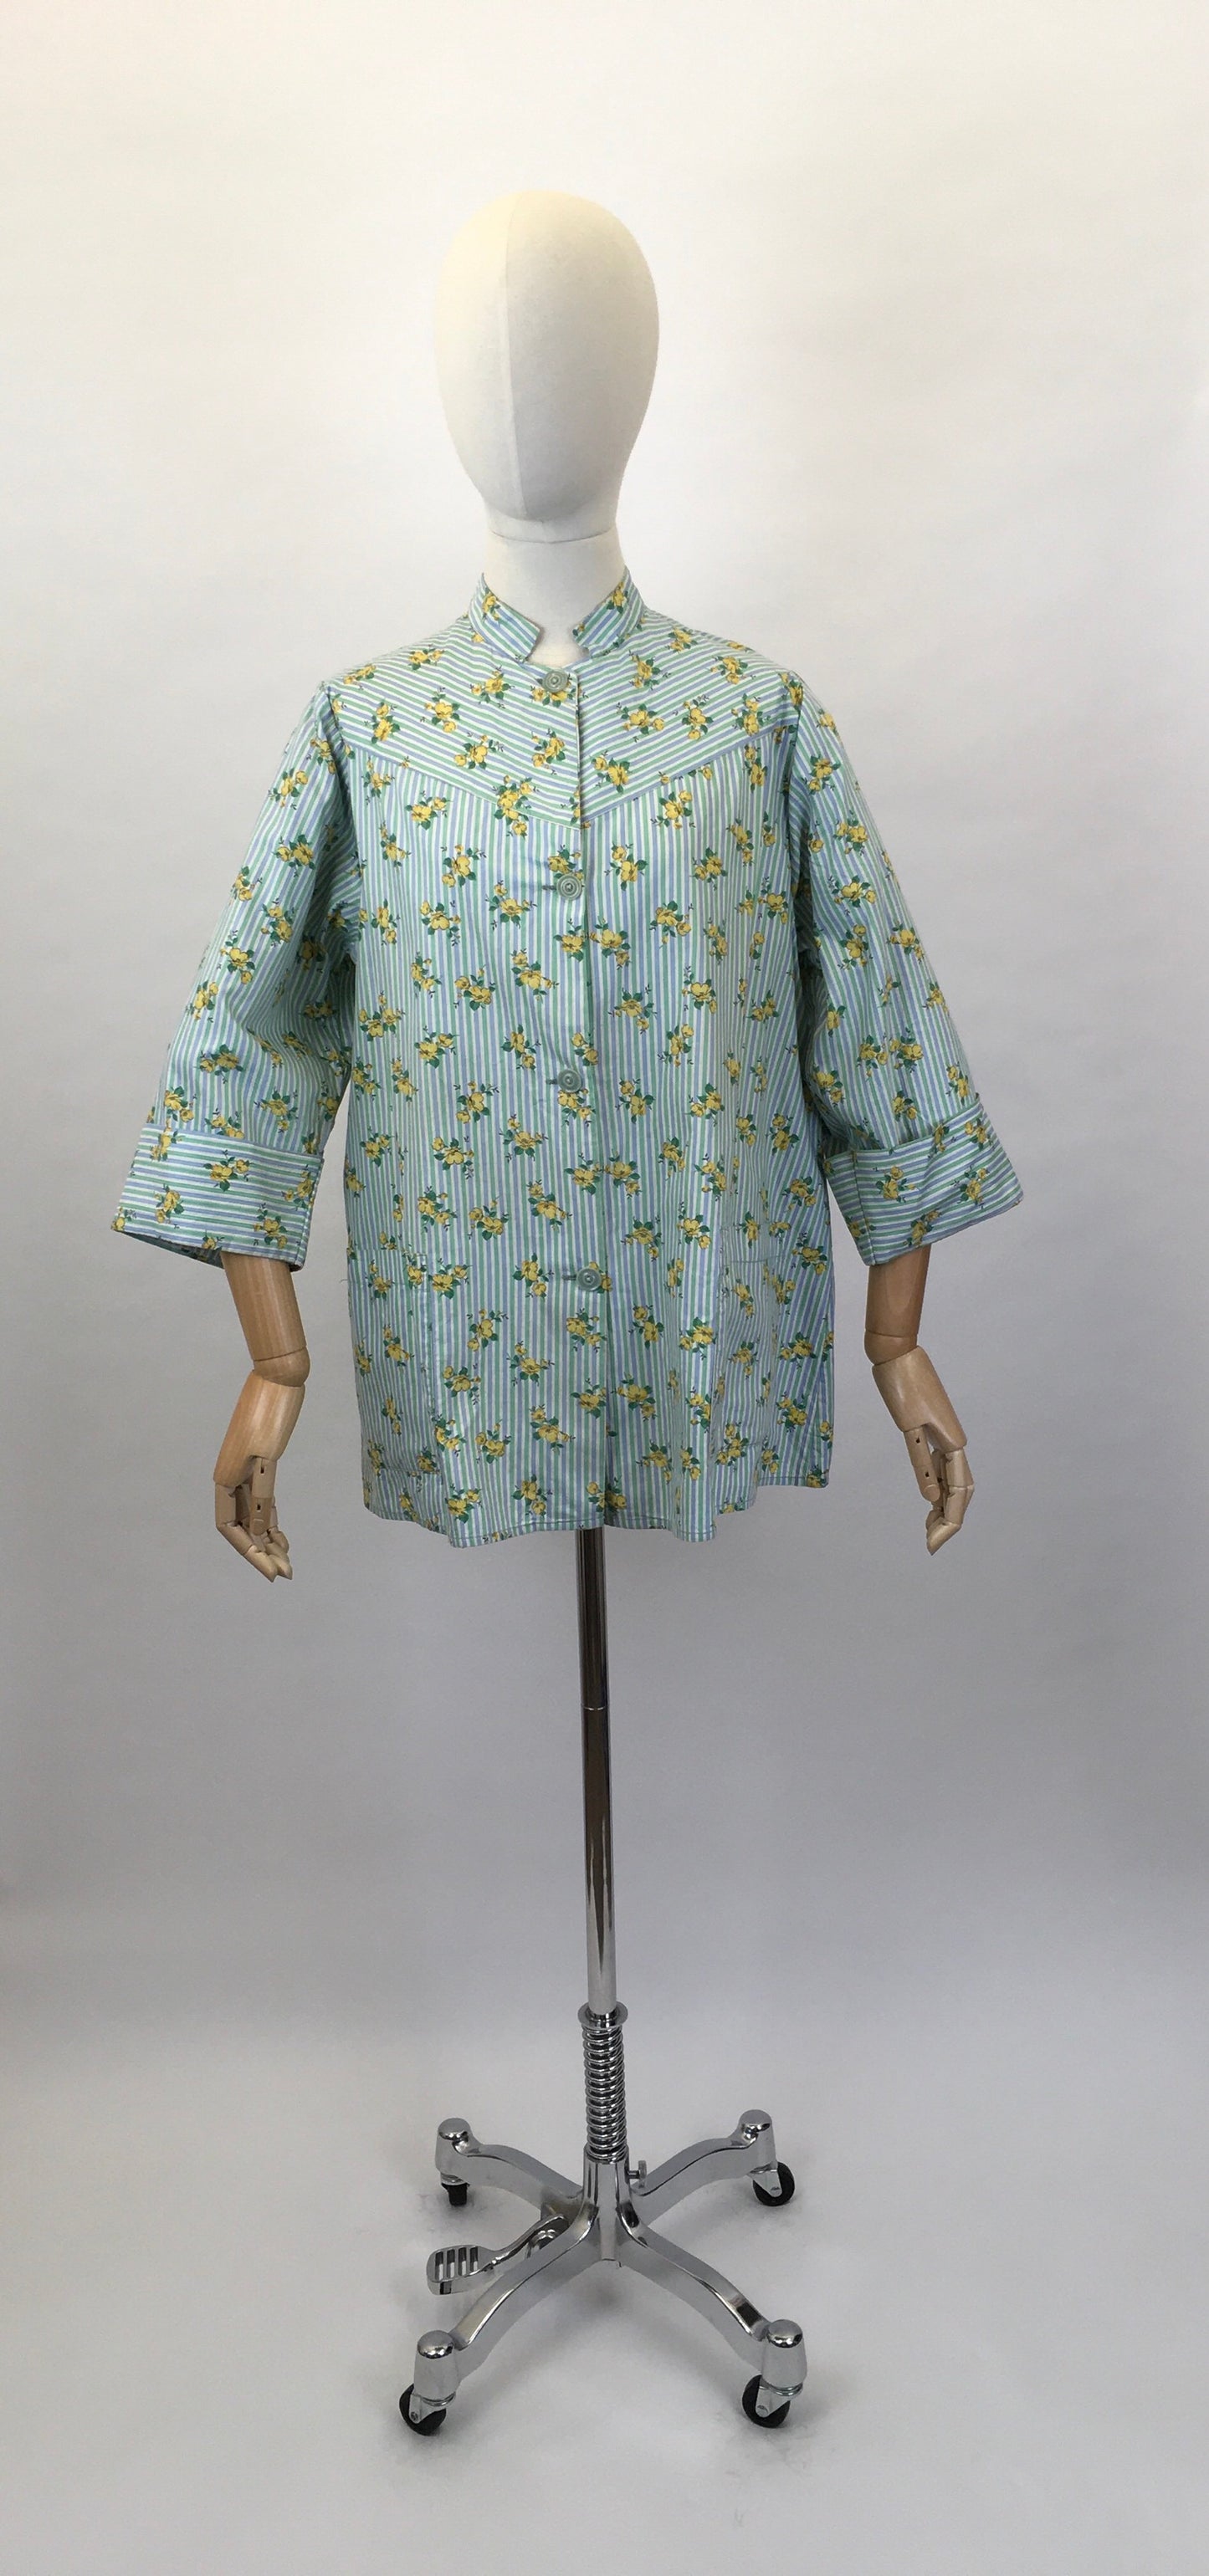 Original 1950s Smock Made By ‘ Country Reg’d ‘ - In a Lovely Contrast Floral and Stripe in Soft Greens, Blues and Buttercup Yellows